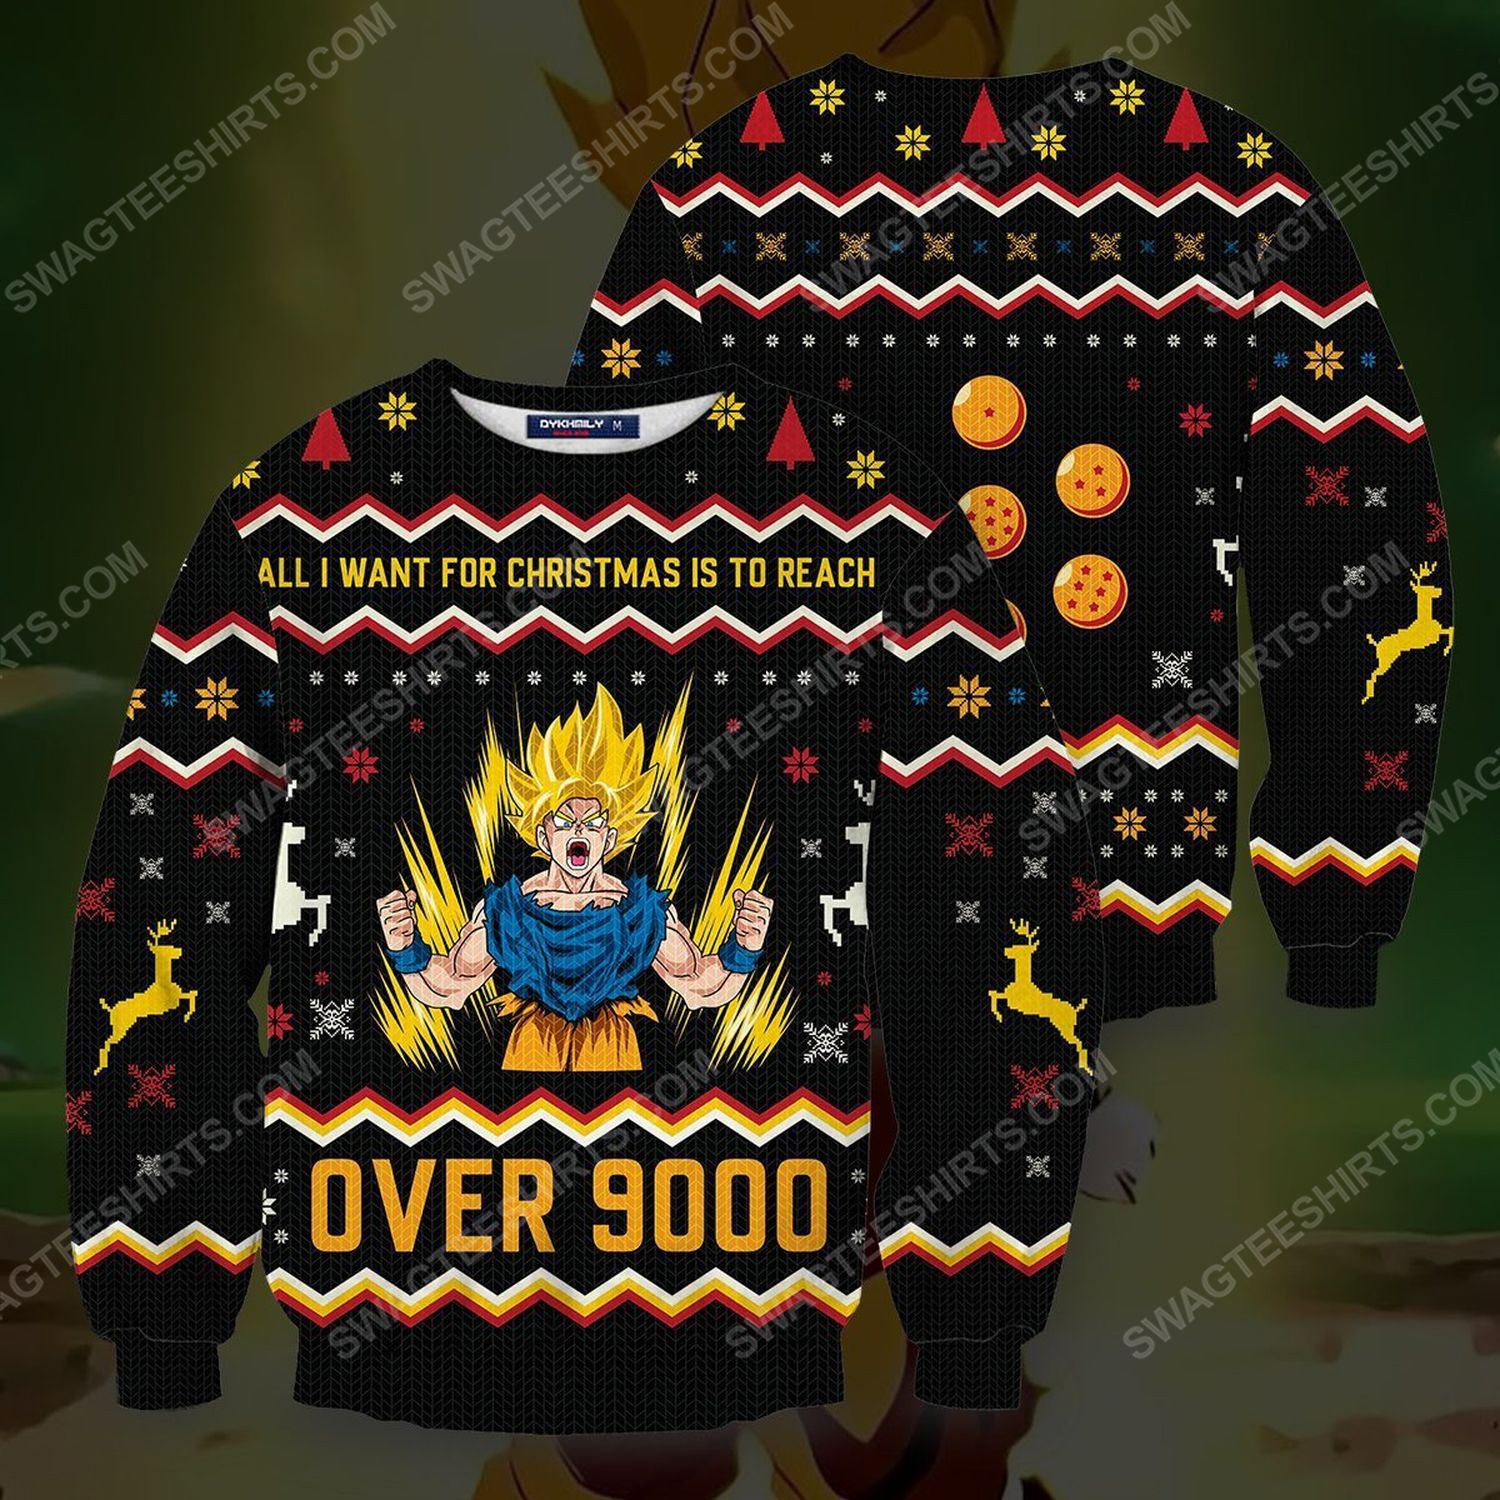 All i want for christmas is to reach over 9000 full print ugly christmas sweater 1